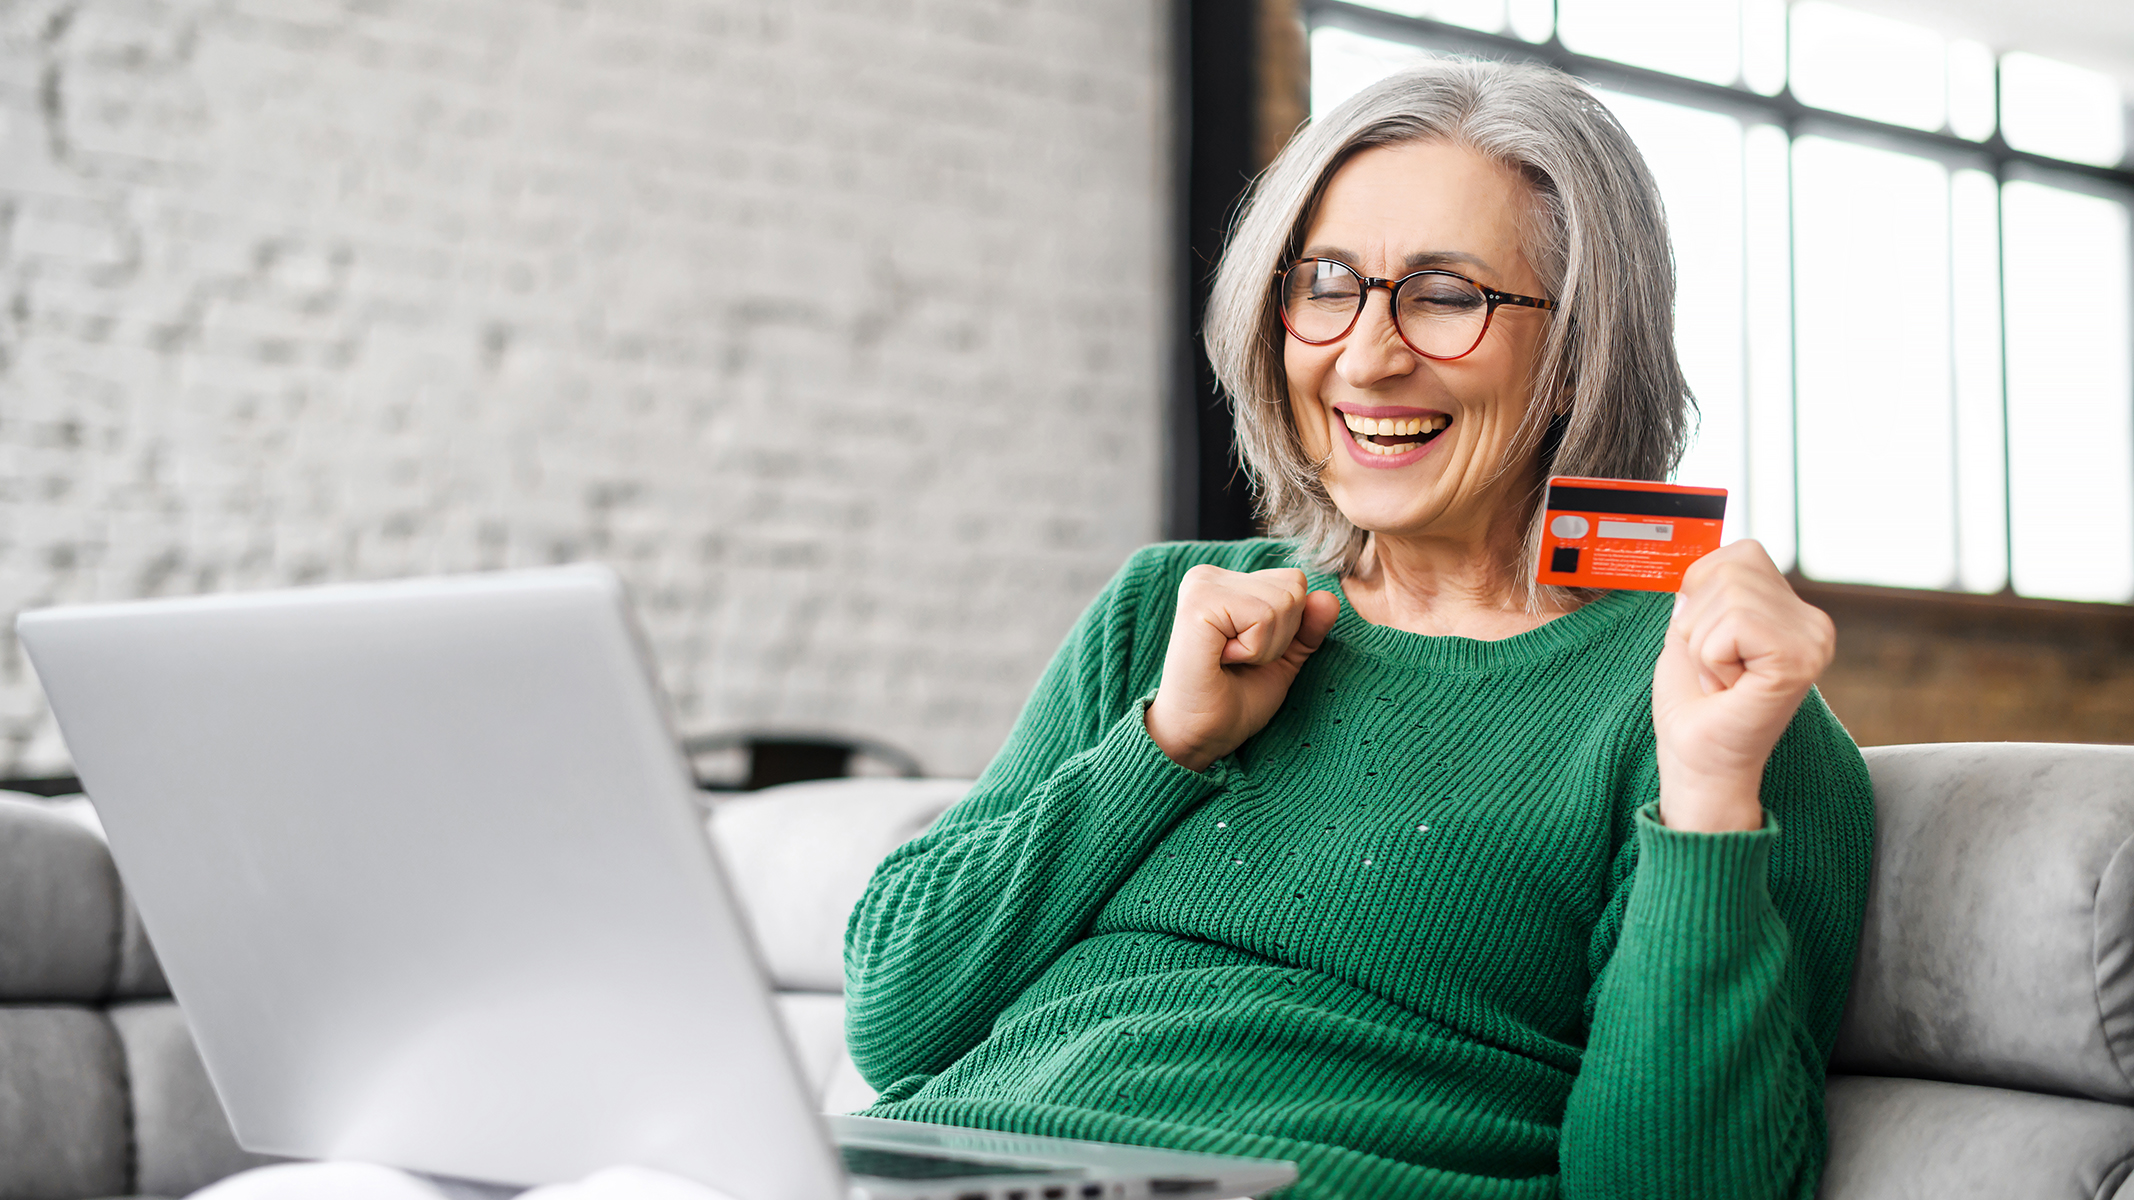 Senior woman smiling and sitting on couch with card and open laptop.